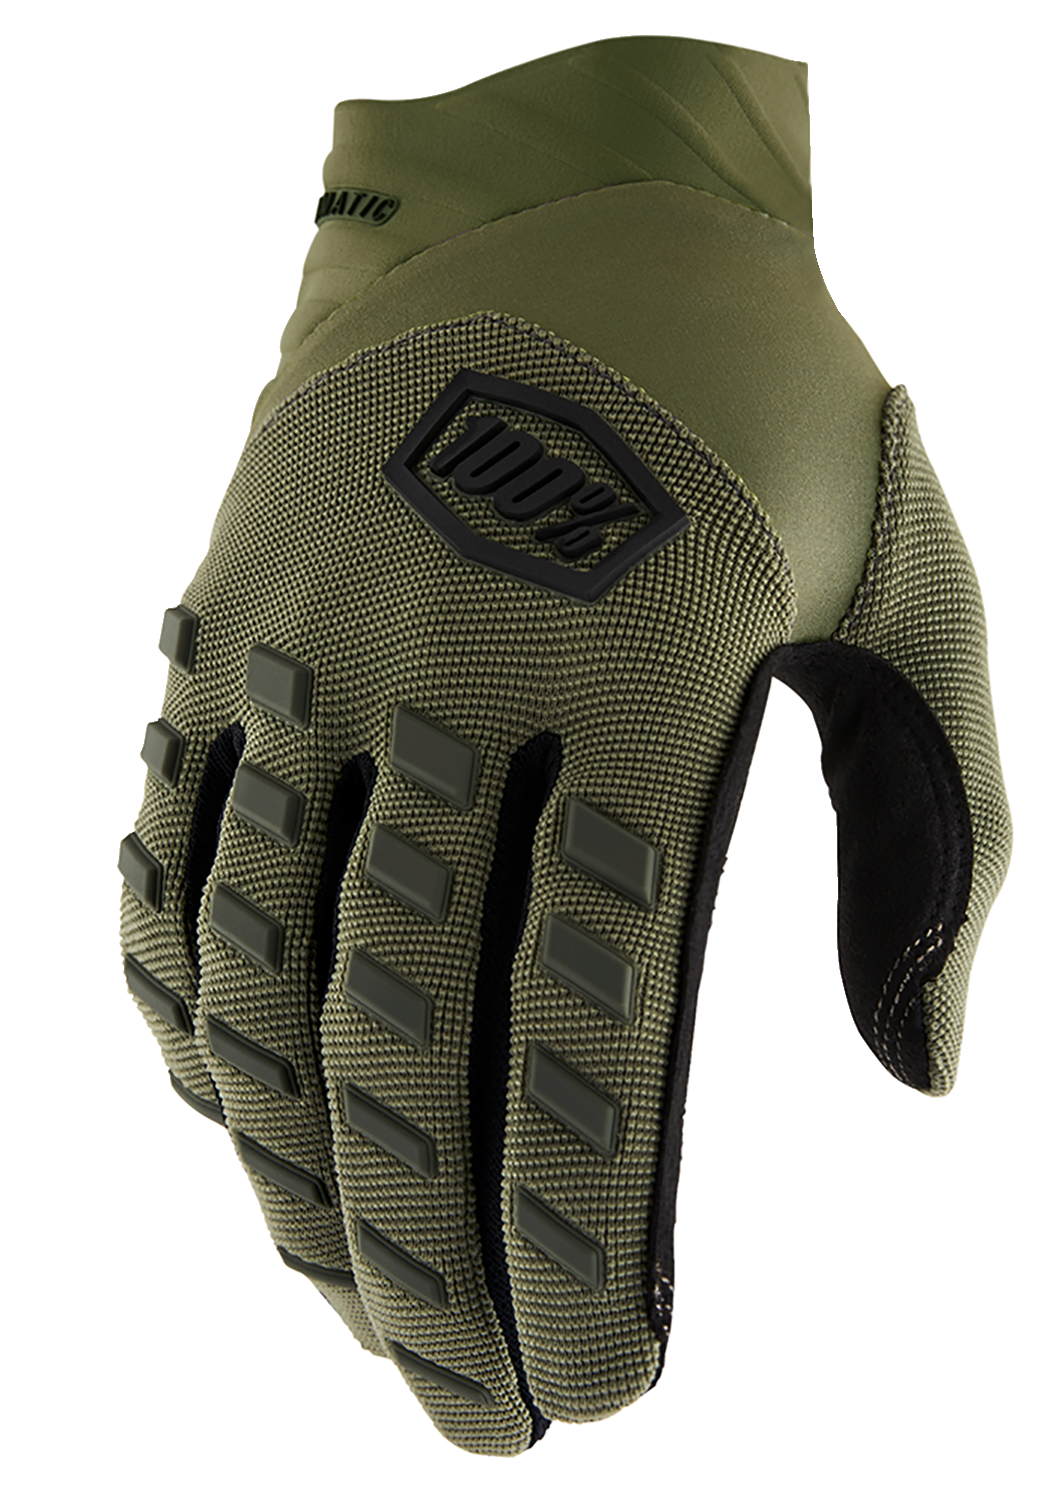 100% Airmatic Gloves - Green - Small 10000-00035